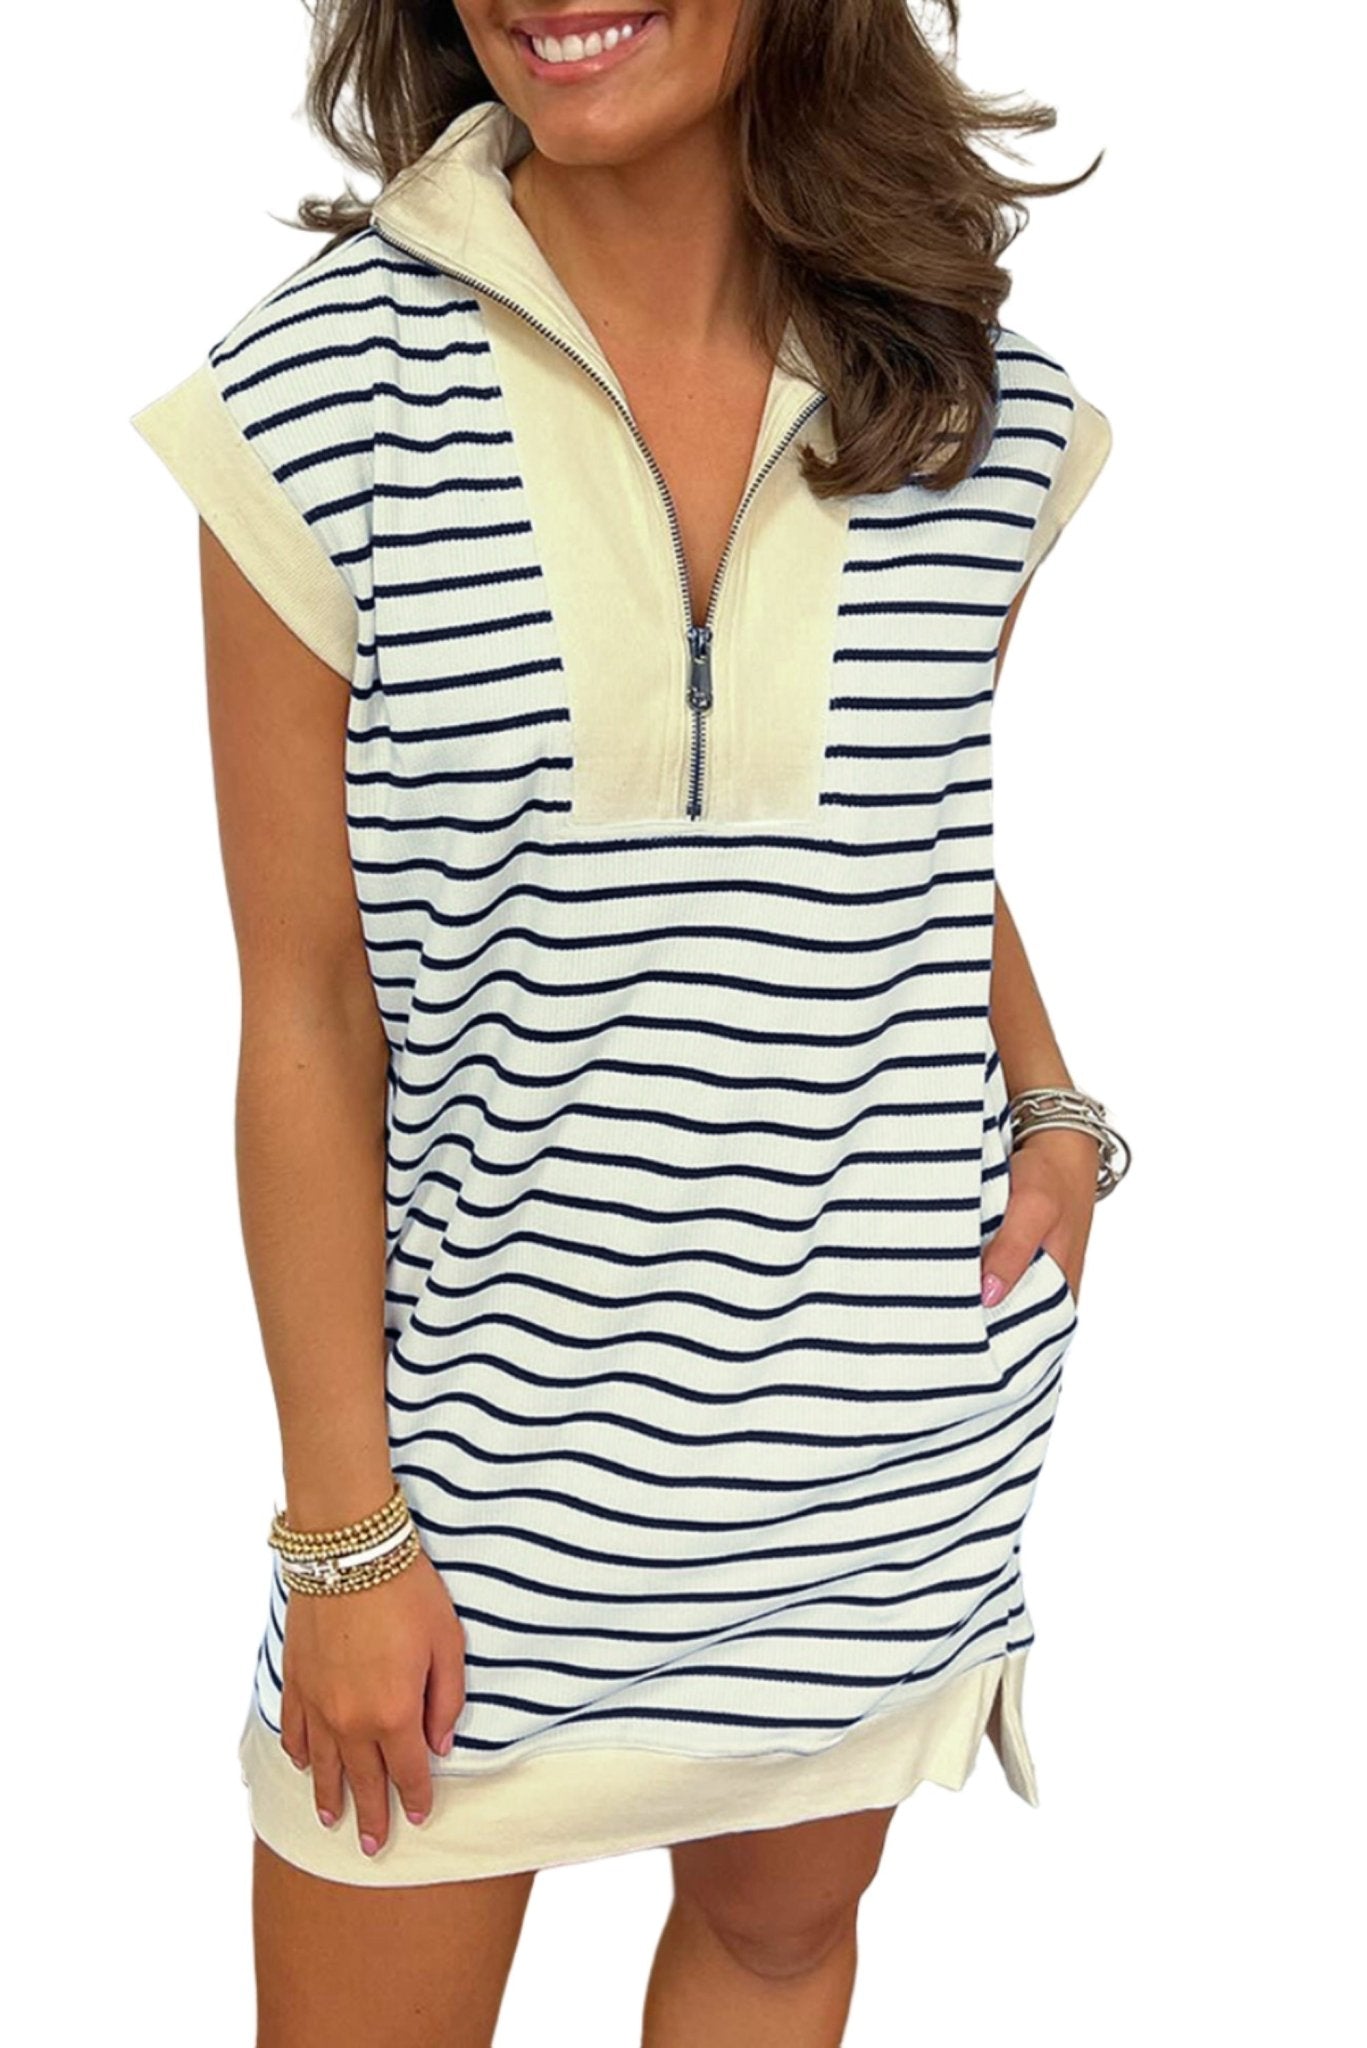 The image is showcasing a Women's Quarter Zip Collared Cap Sleeve Mini Dress Cotton Casual Summer Short Dress at Mommy & Lino's Closet